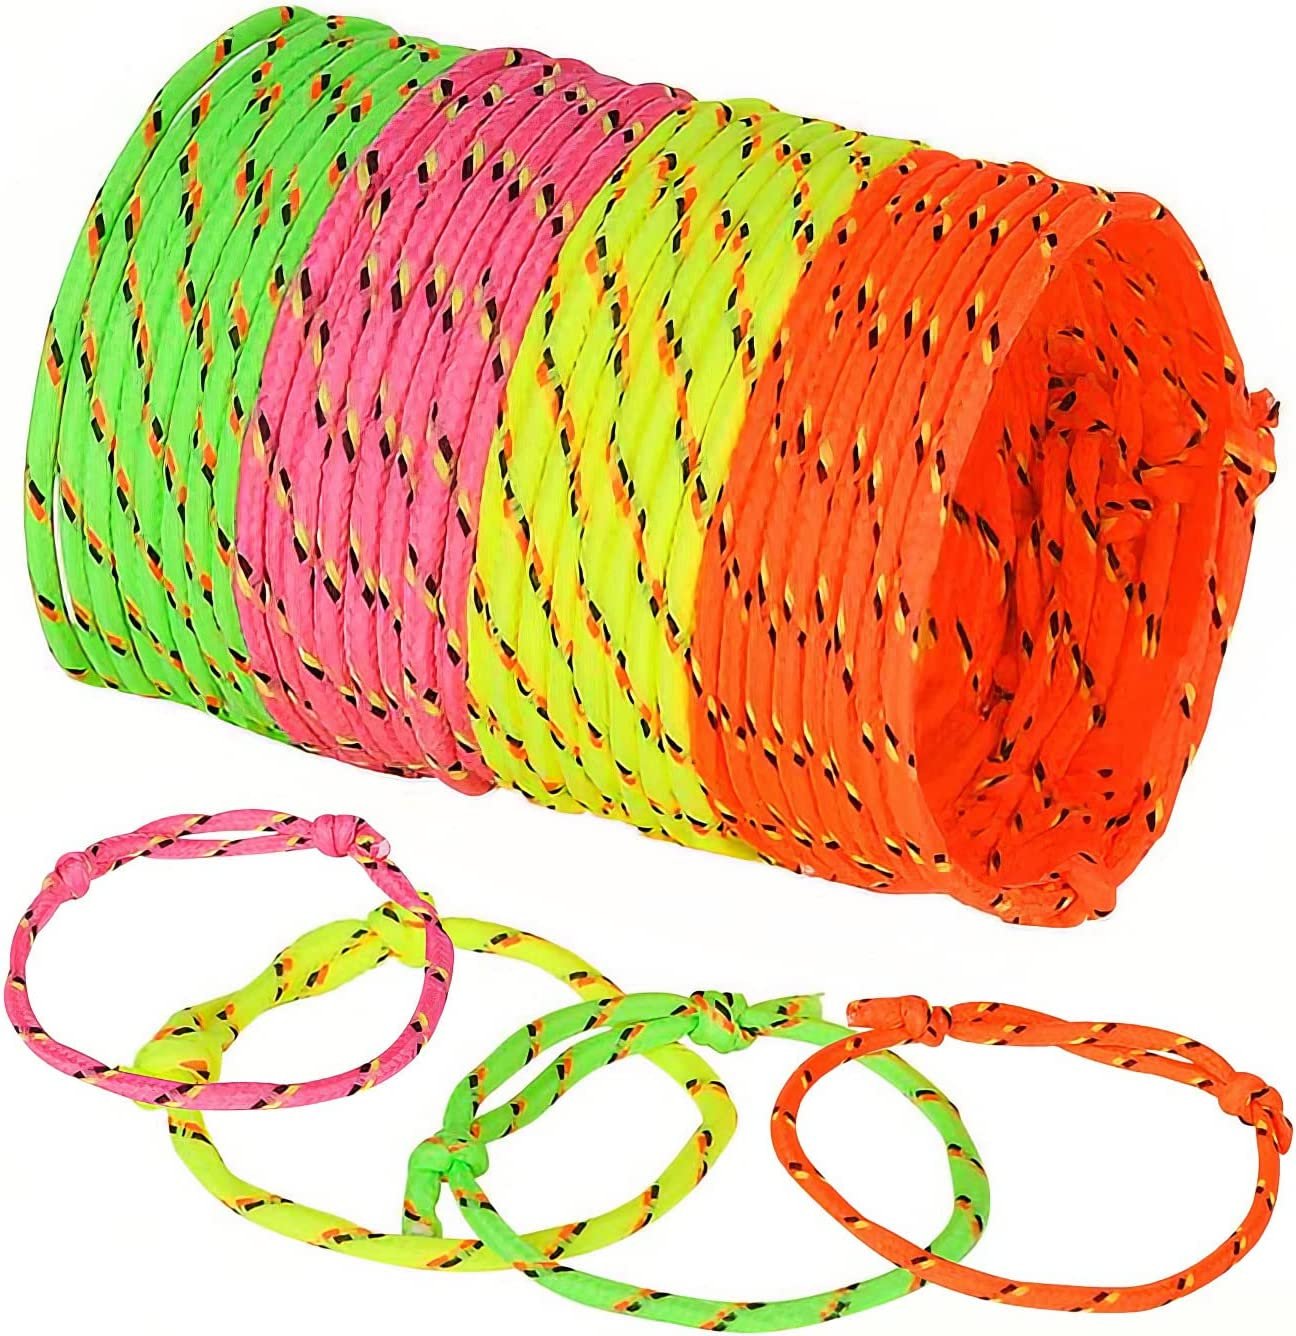 ArtCreativity Adjustable Friendship Bracelets - Pack of 144 Fabric Material Wristbands in Assorted Neon Colors - Fun Party Favor, Carnival Prize - Amazing Gift for kids, adults and pets